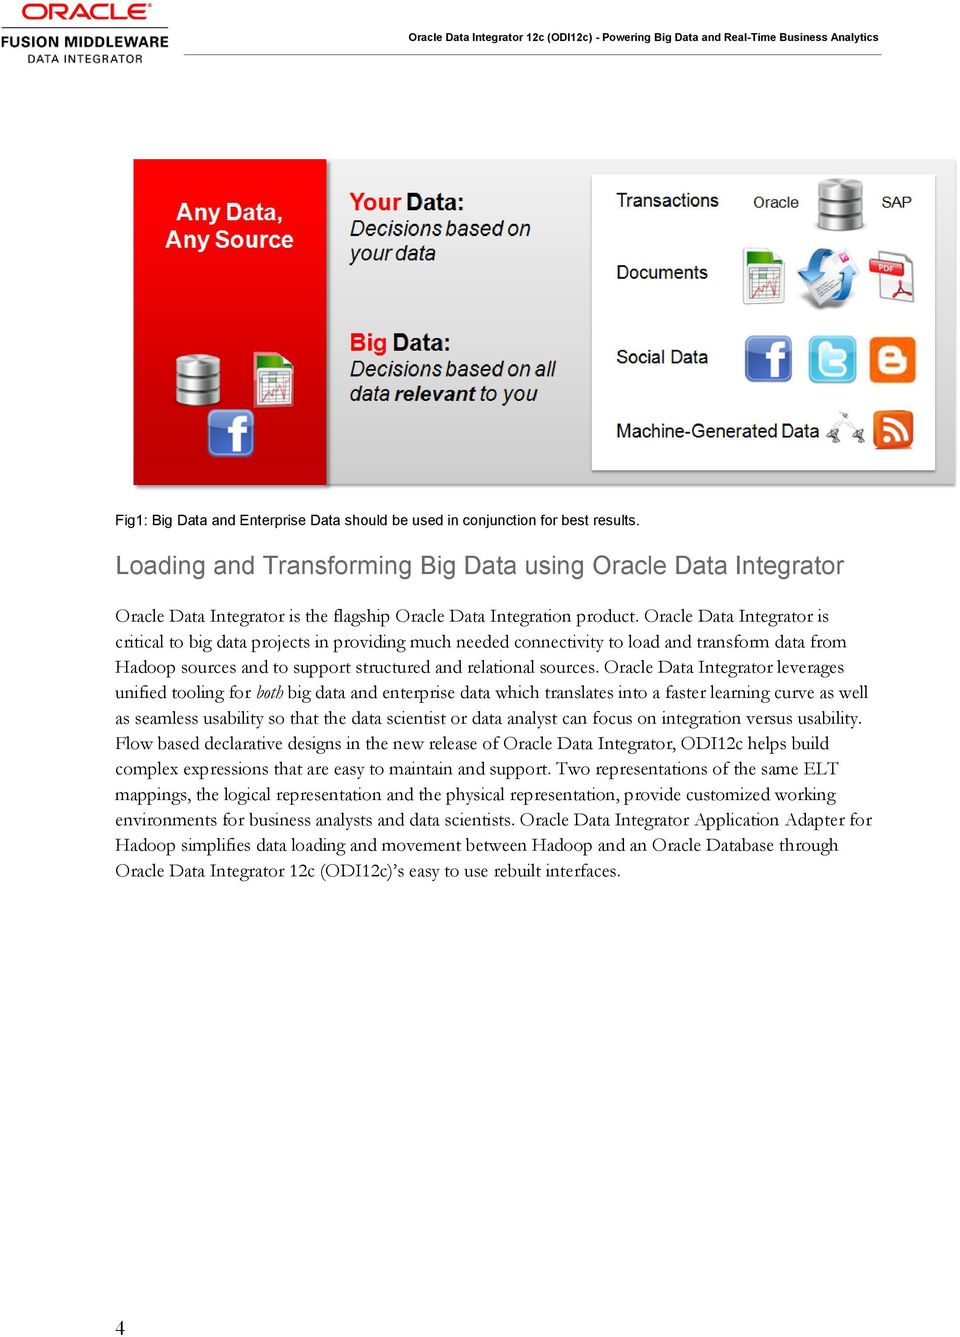 Oracle Data Integrator is critical to big data projects in providing much needed connectivity to load and transform data from Hadoop sources and to support structured and relational sources.